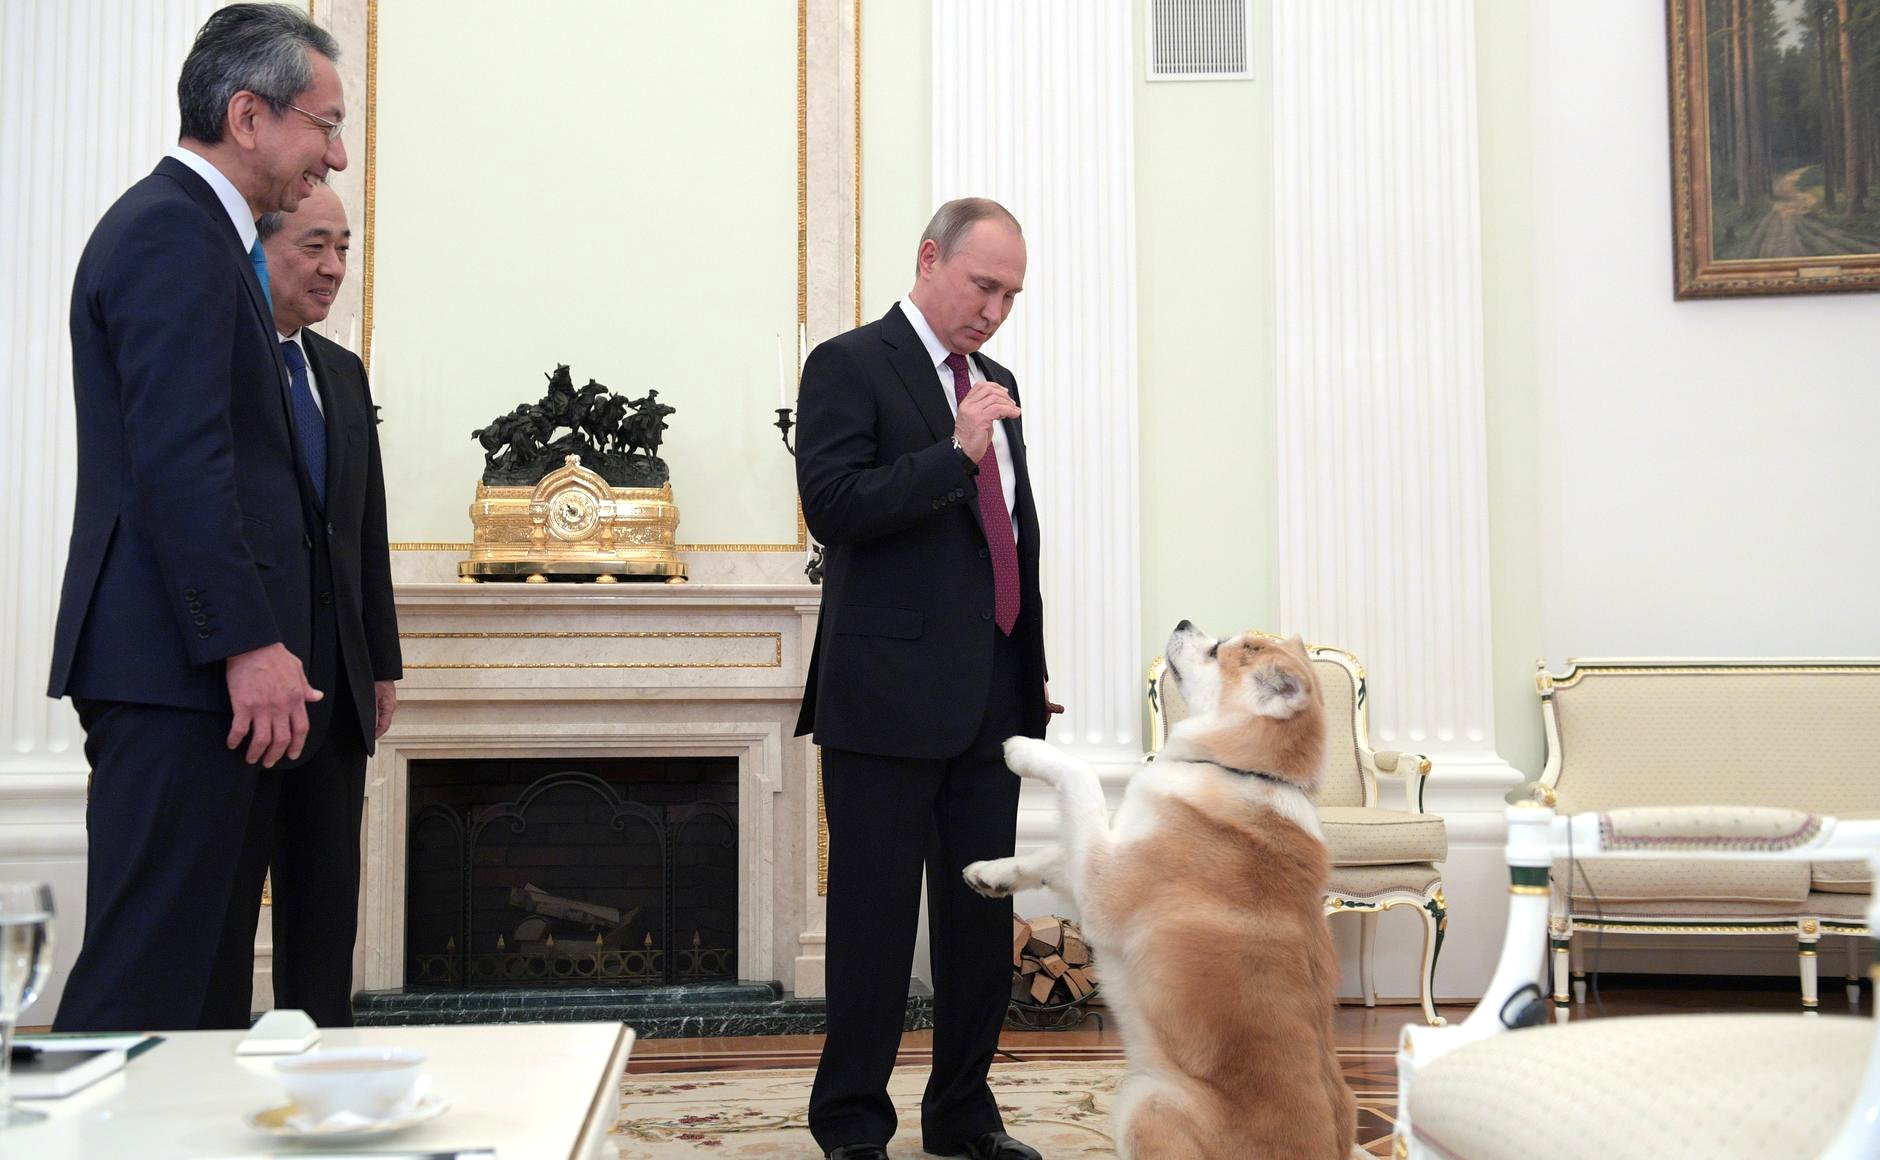 Putin introduces journalists to his Japanese dog, Yume.